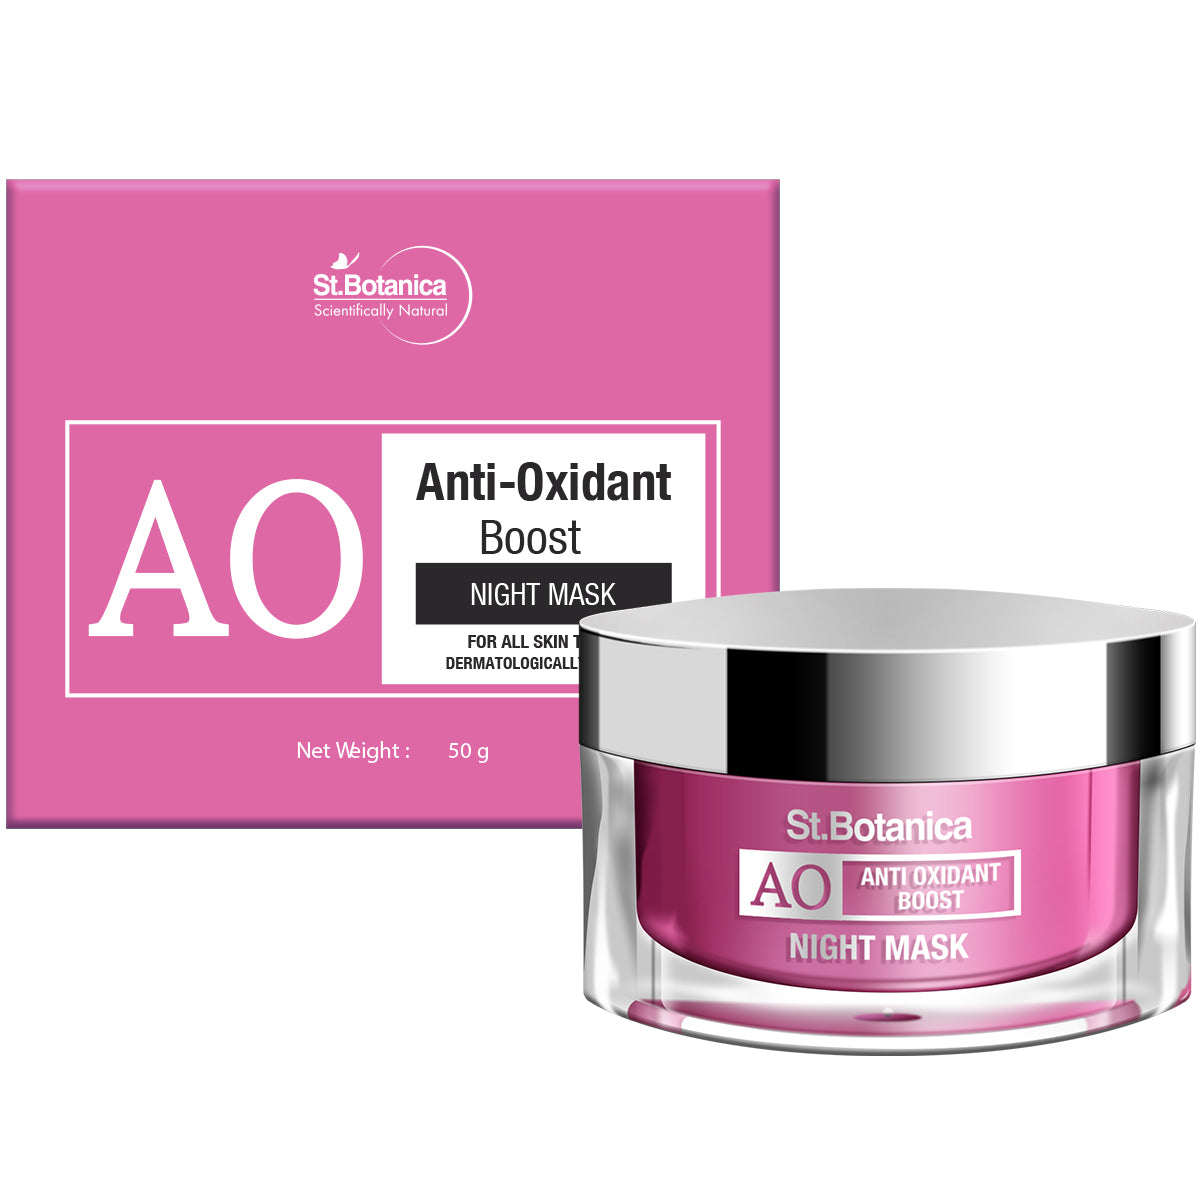 St.Botanica Anti Oxidant Boost Over Night Mask - For Clear & Radiant Skin (Night Cream + Overnight Mask), 50 g (STBOT550)